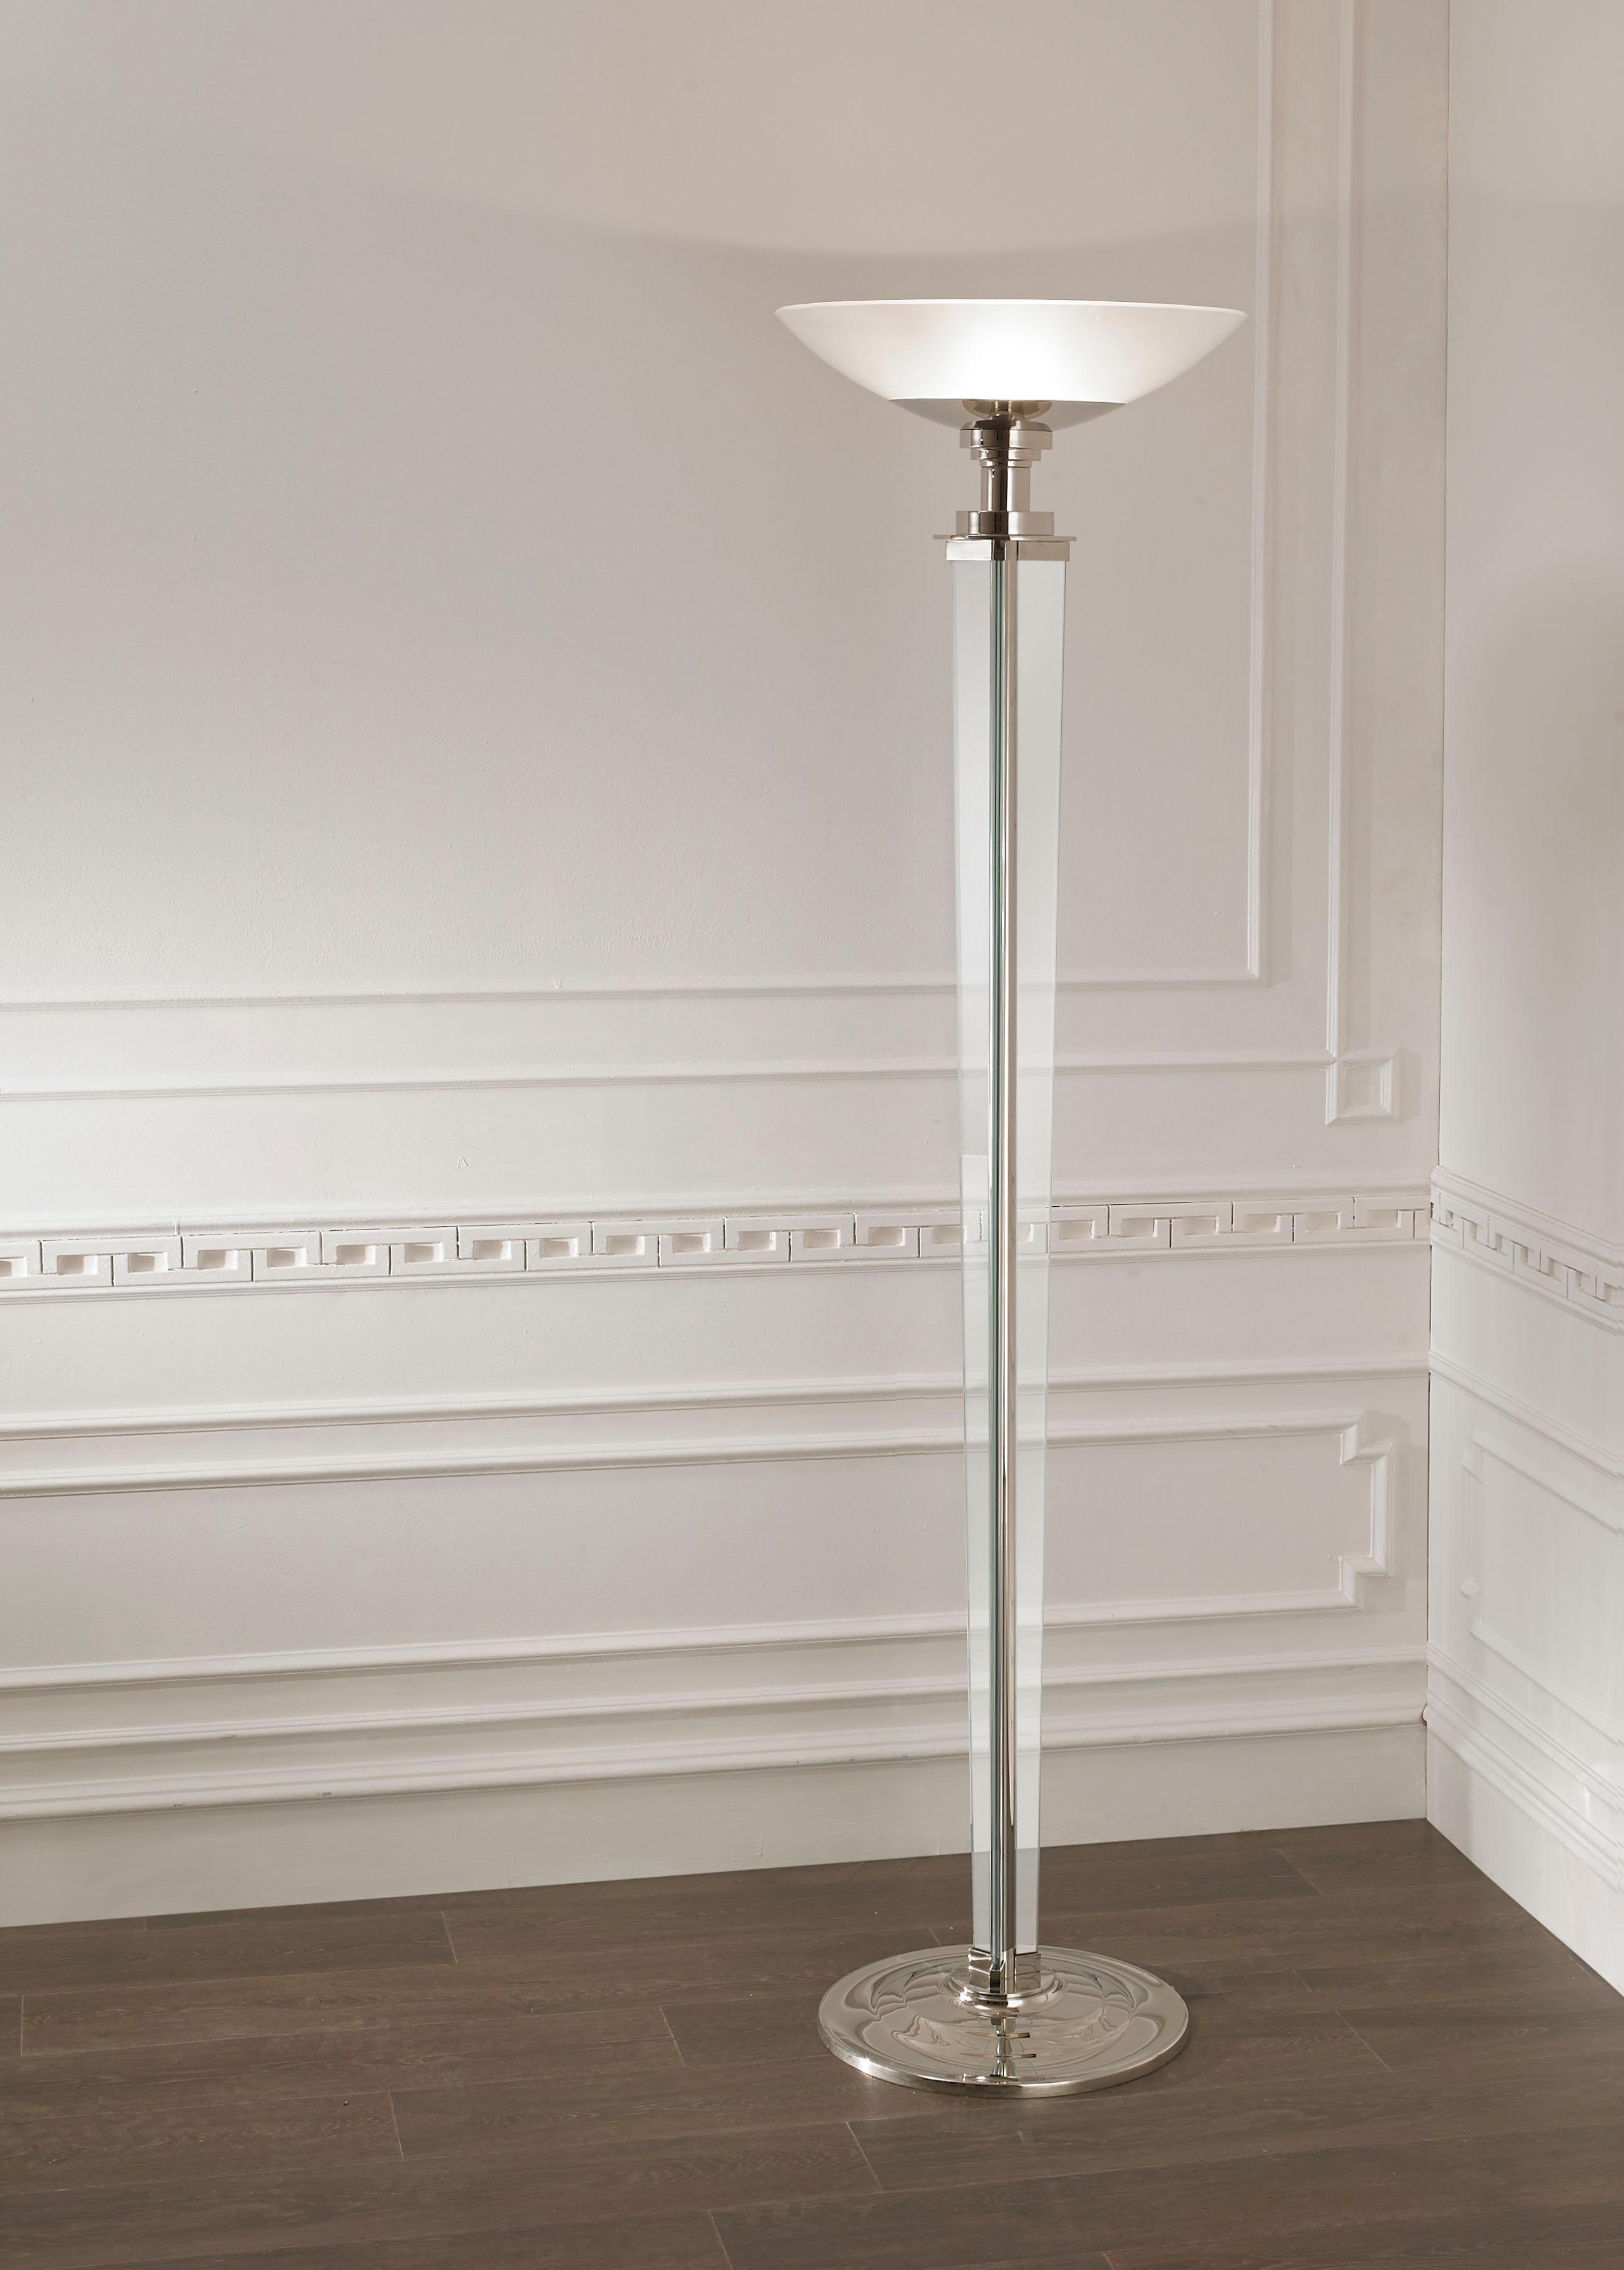 Bronze and Glass Art Deco Floor Lamp can be proposed with nickel finish, Gold finish or old bronze.